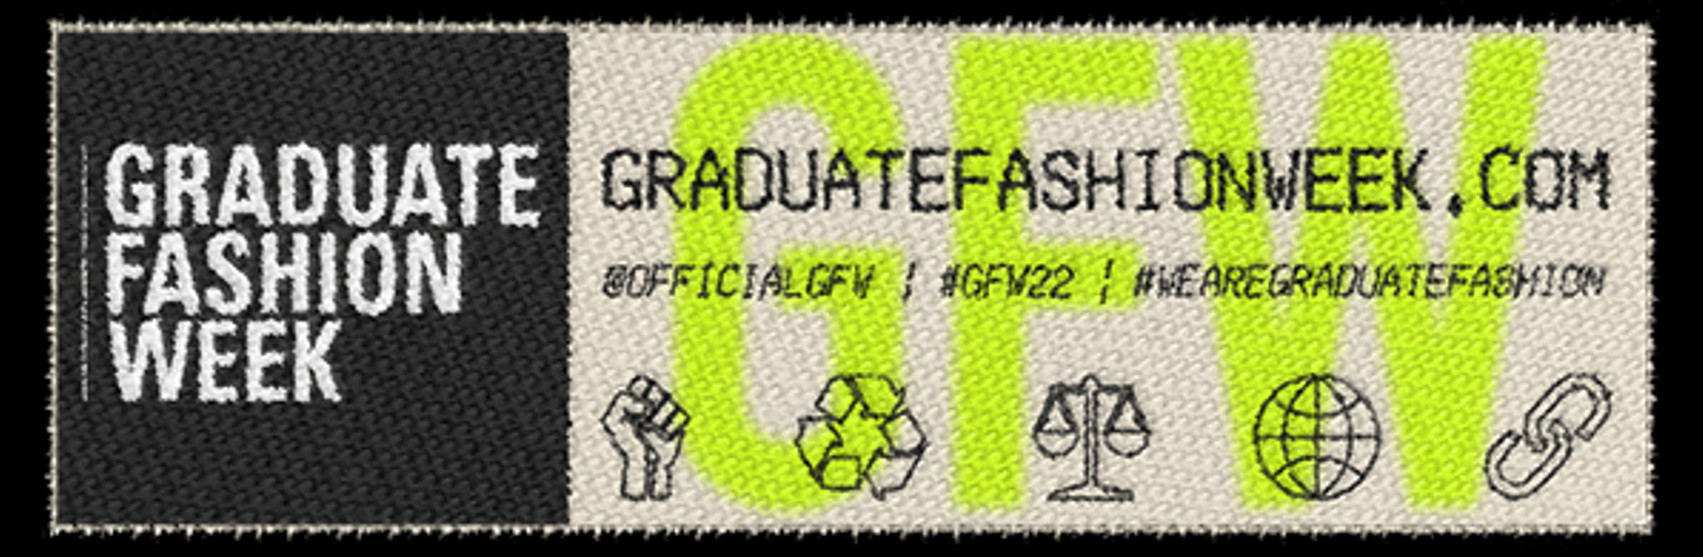 Graduate fashion foundation announces class of 2021 mentoring programme in collaboration with gap inc